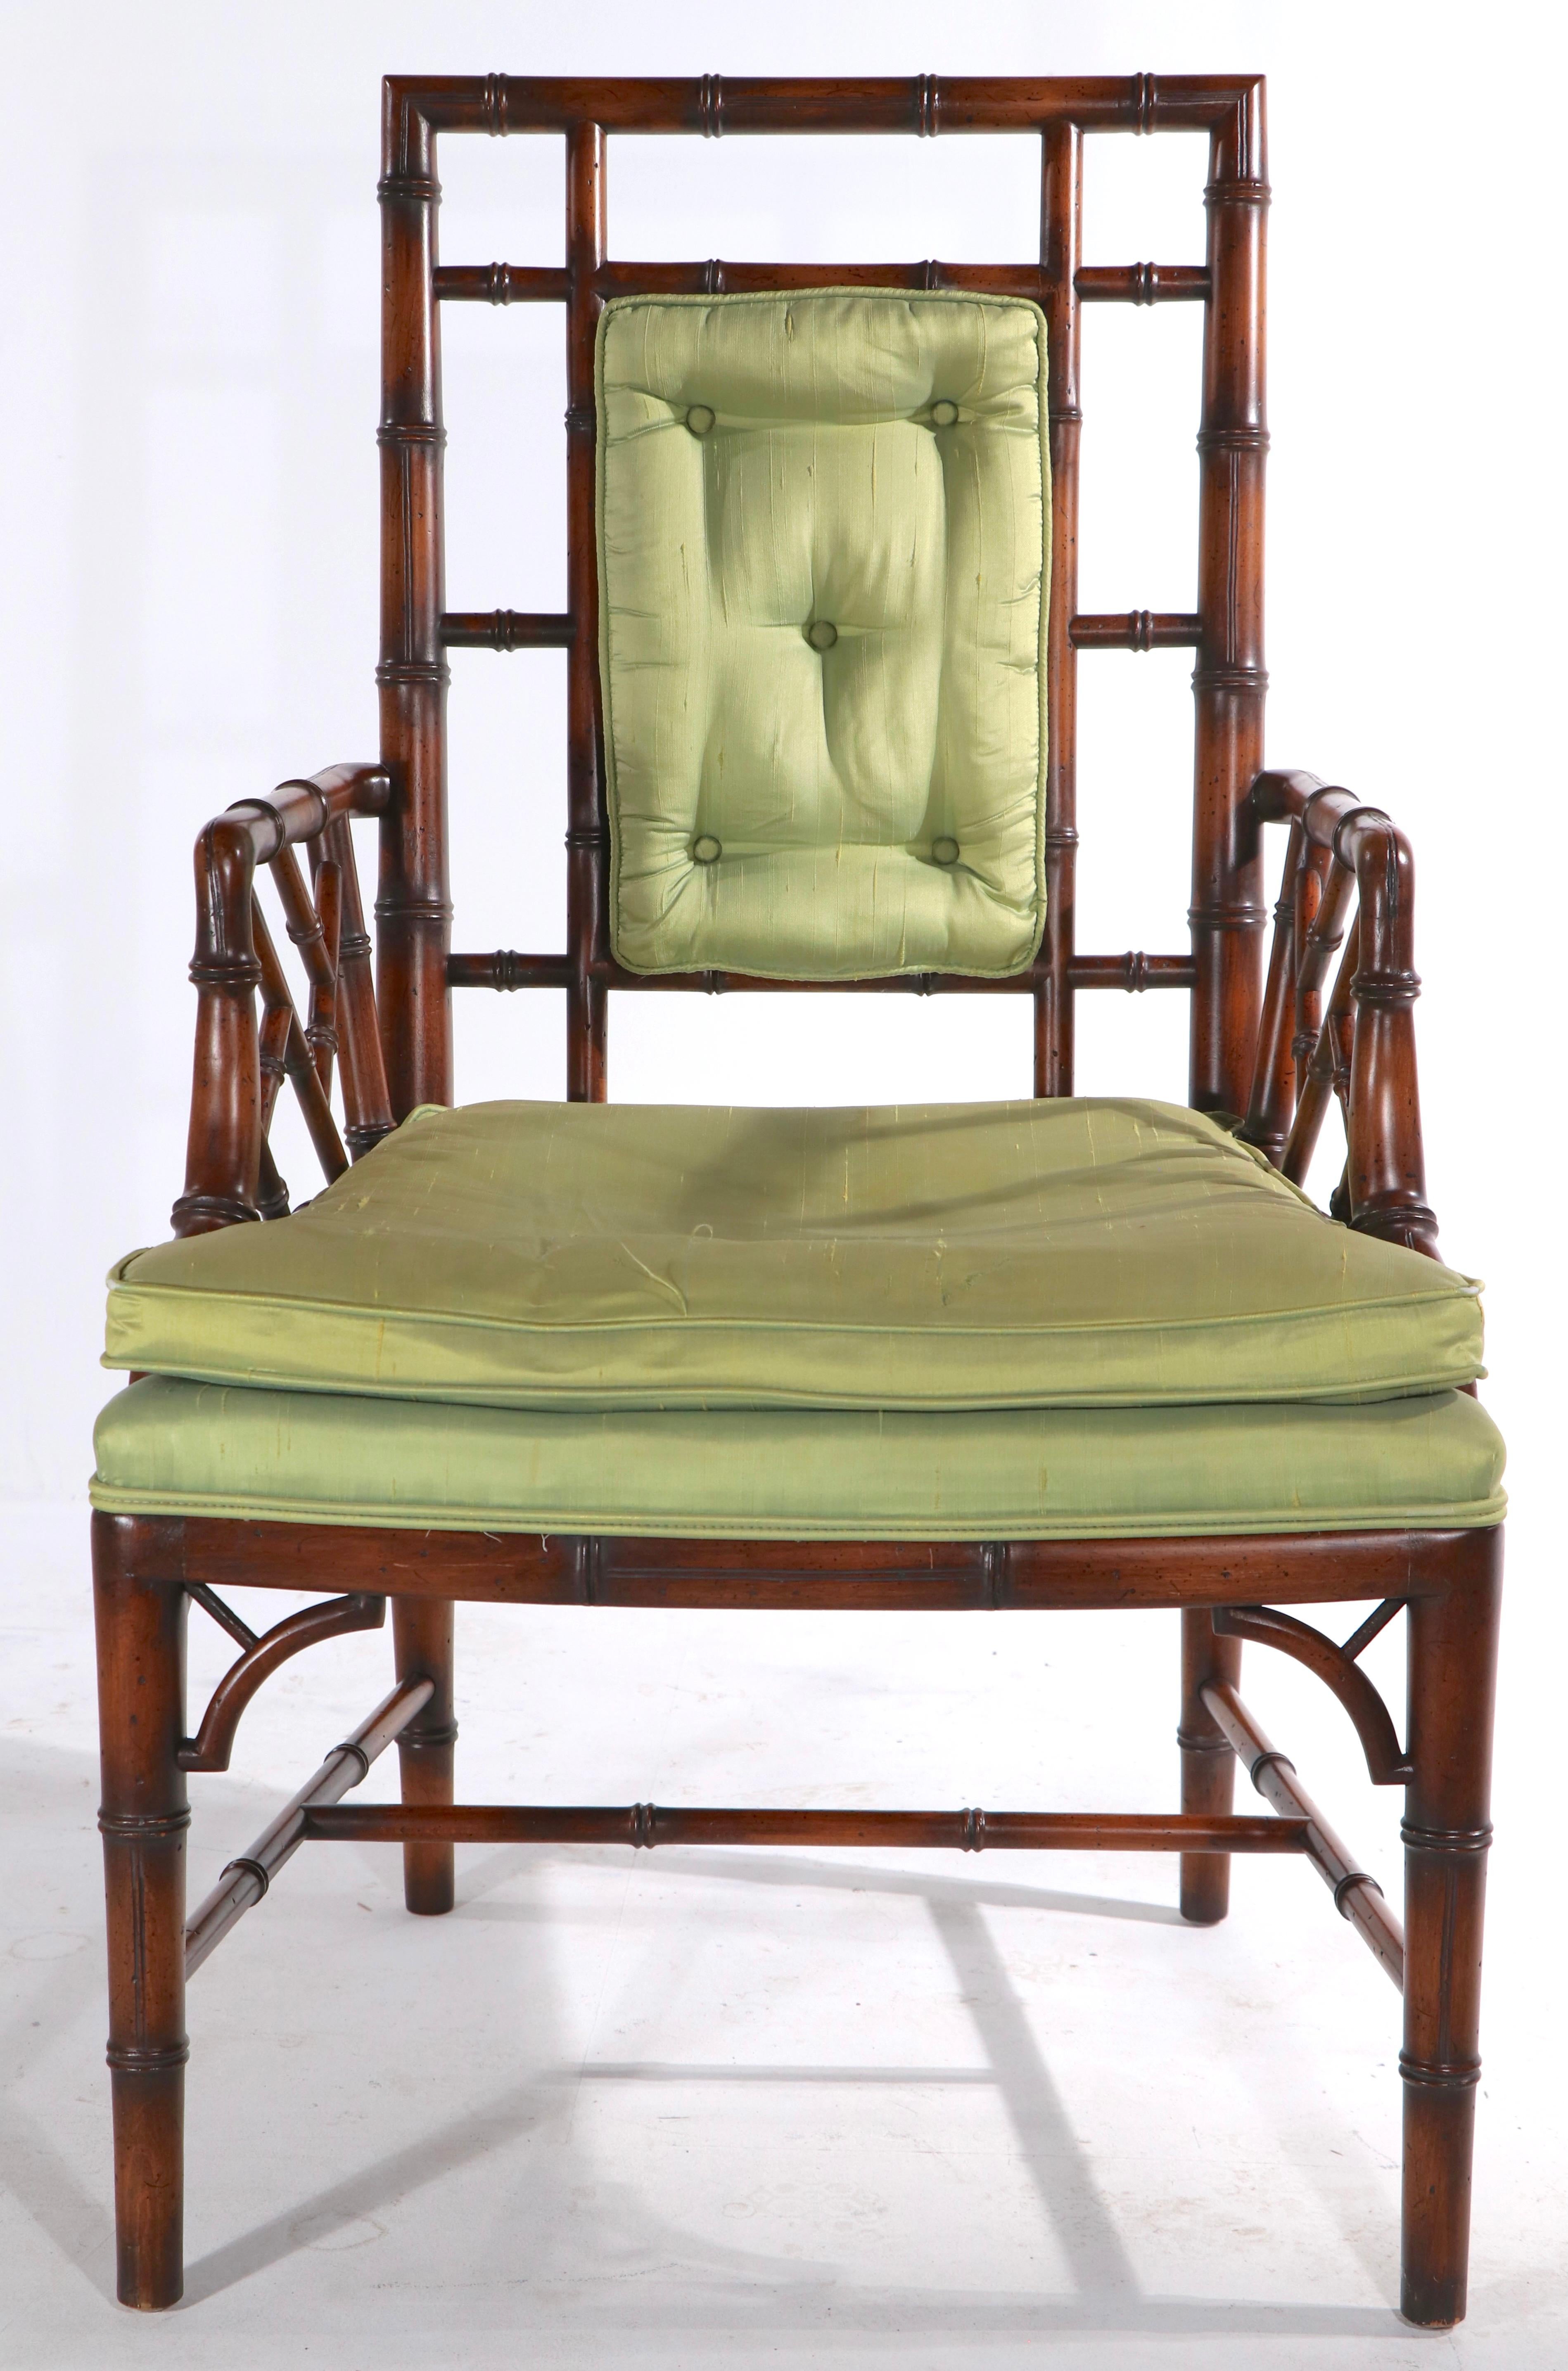 Chic and sophisticated faux bamboo armchair made by noted furniture manufacturer The Schoonbeck Company, later known as Schonbeck Henredon. The chair has a solid wood frame, with upholstered seat and back rest, the back panel is caned, please see